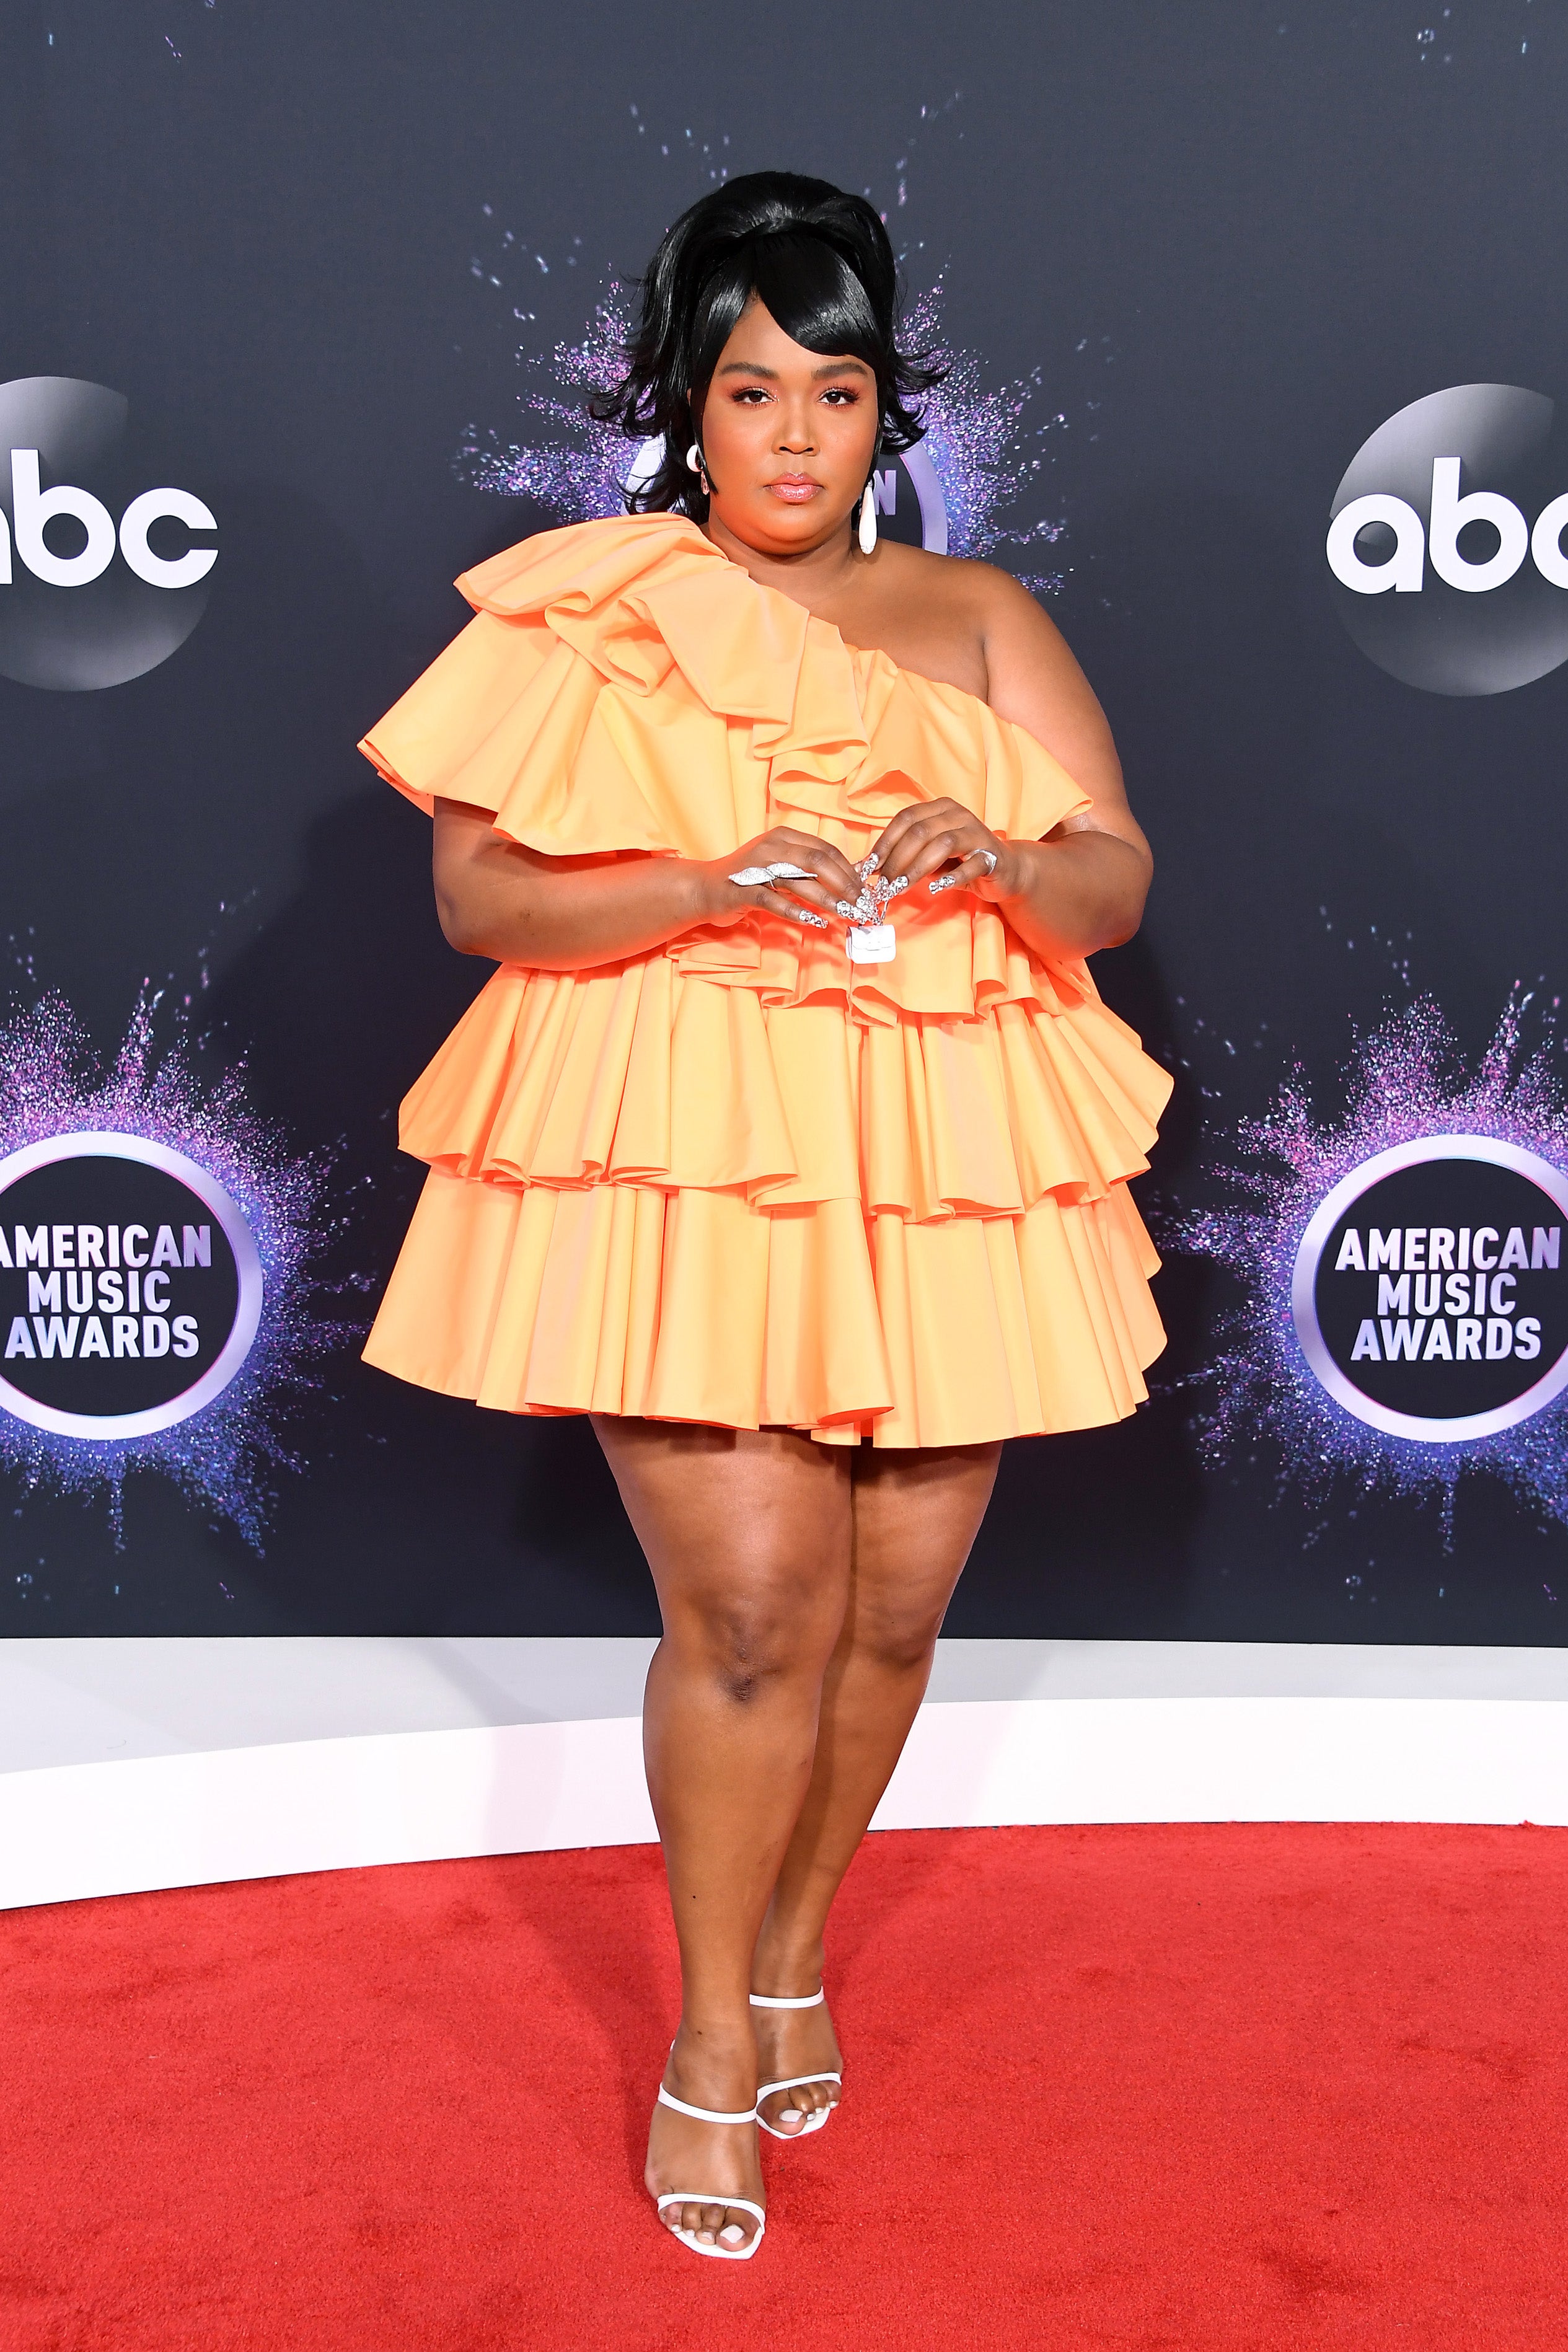 The Best Fashion Moments At The 2019 American Music Awards